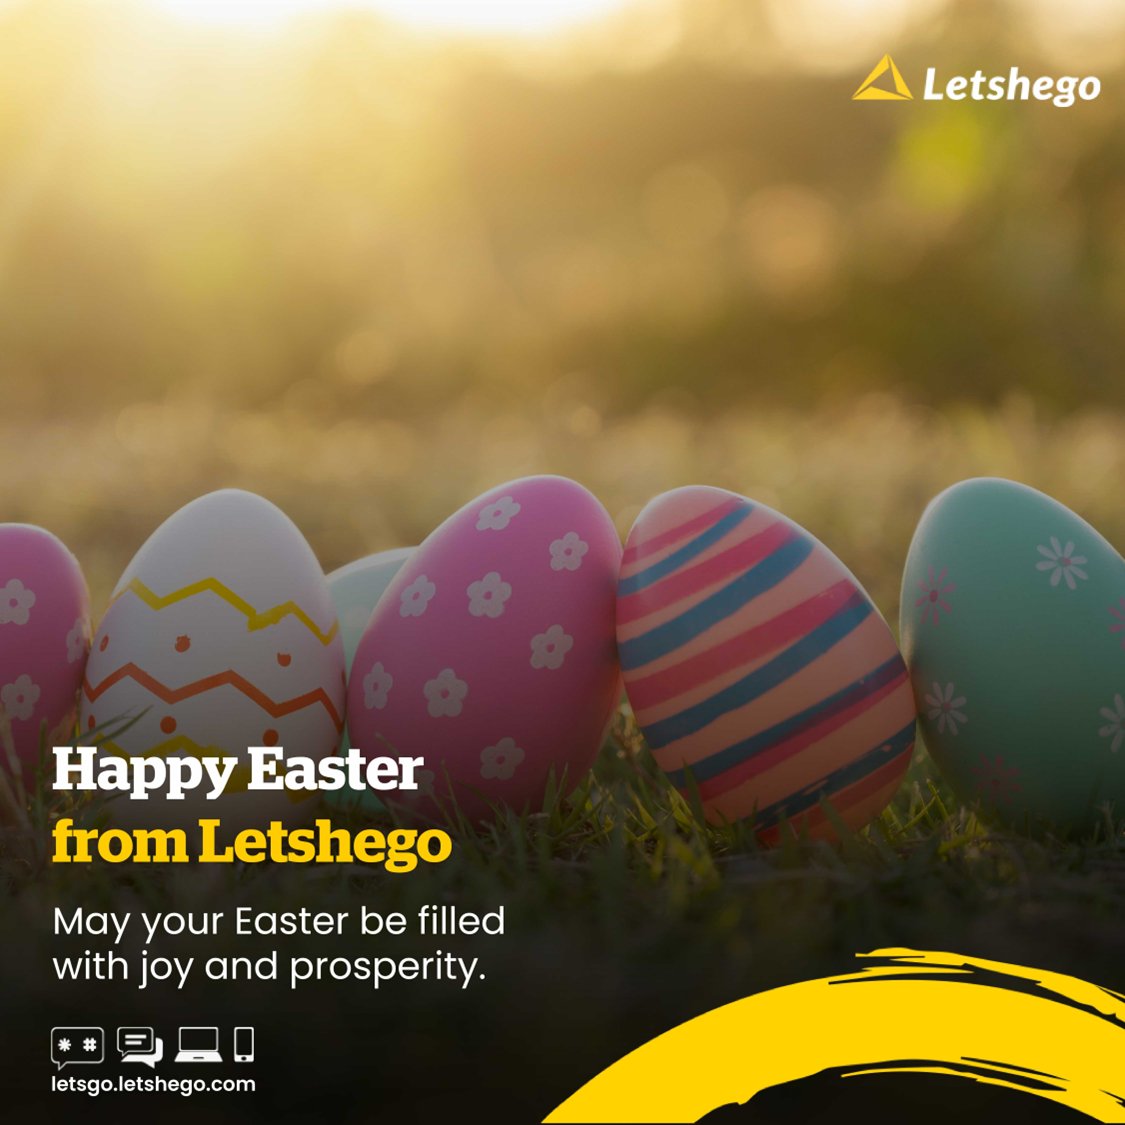 Wishing you a joy-filled Easter from all of us at Letshego! As we celebrate renewal and hope, may your dreams flourish and your aspirations take flight. Here's to a season of growth, prosperity, and new beginnings. #HappyEaster #Letshego